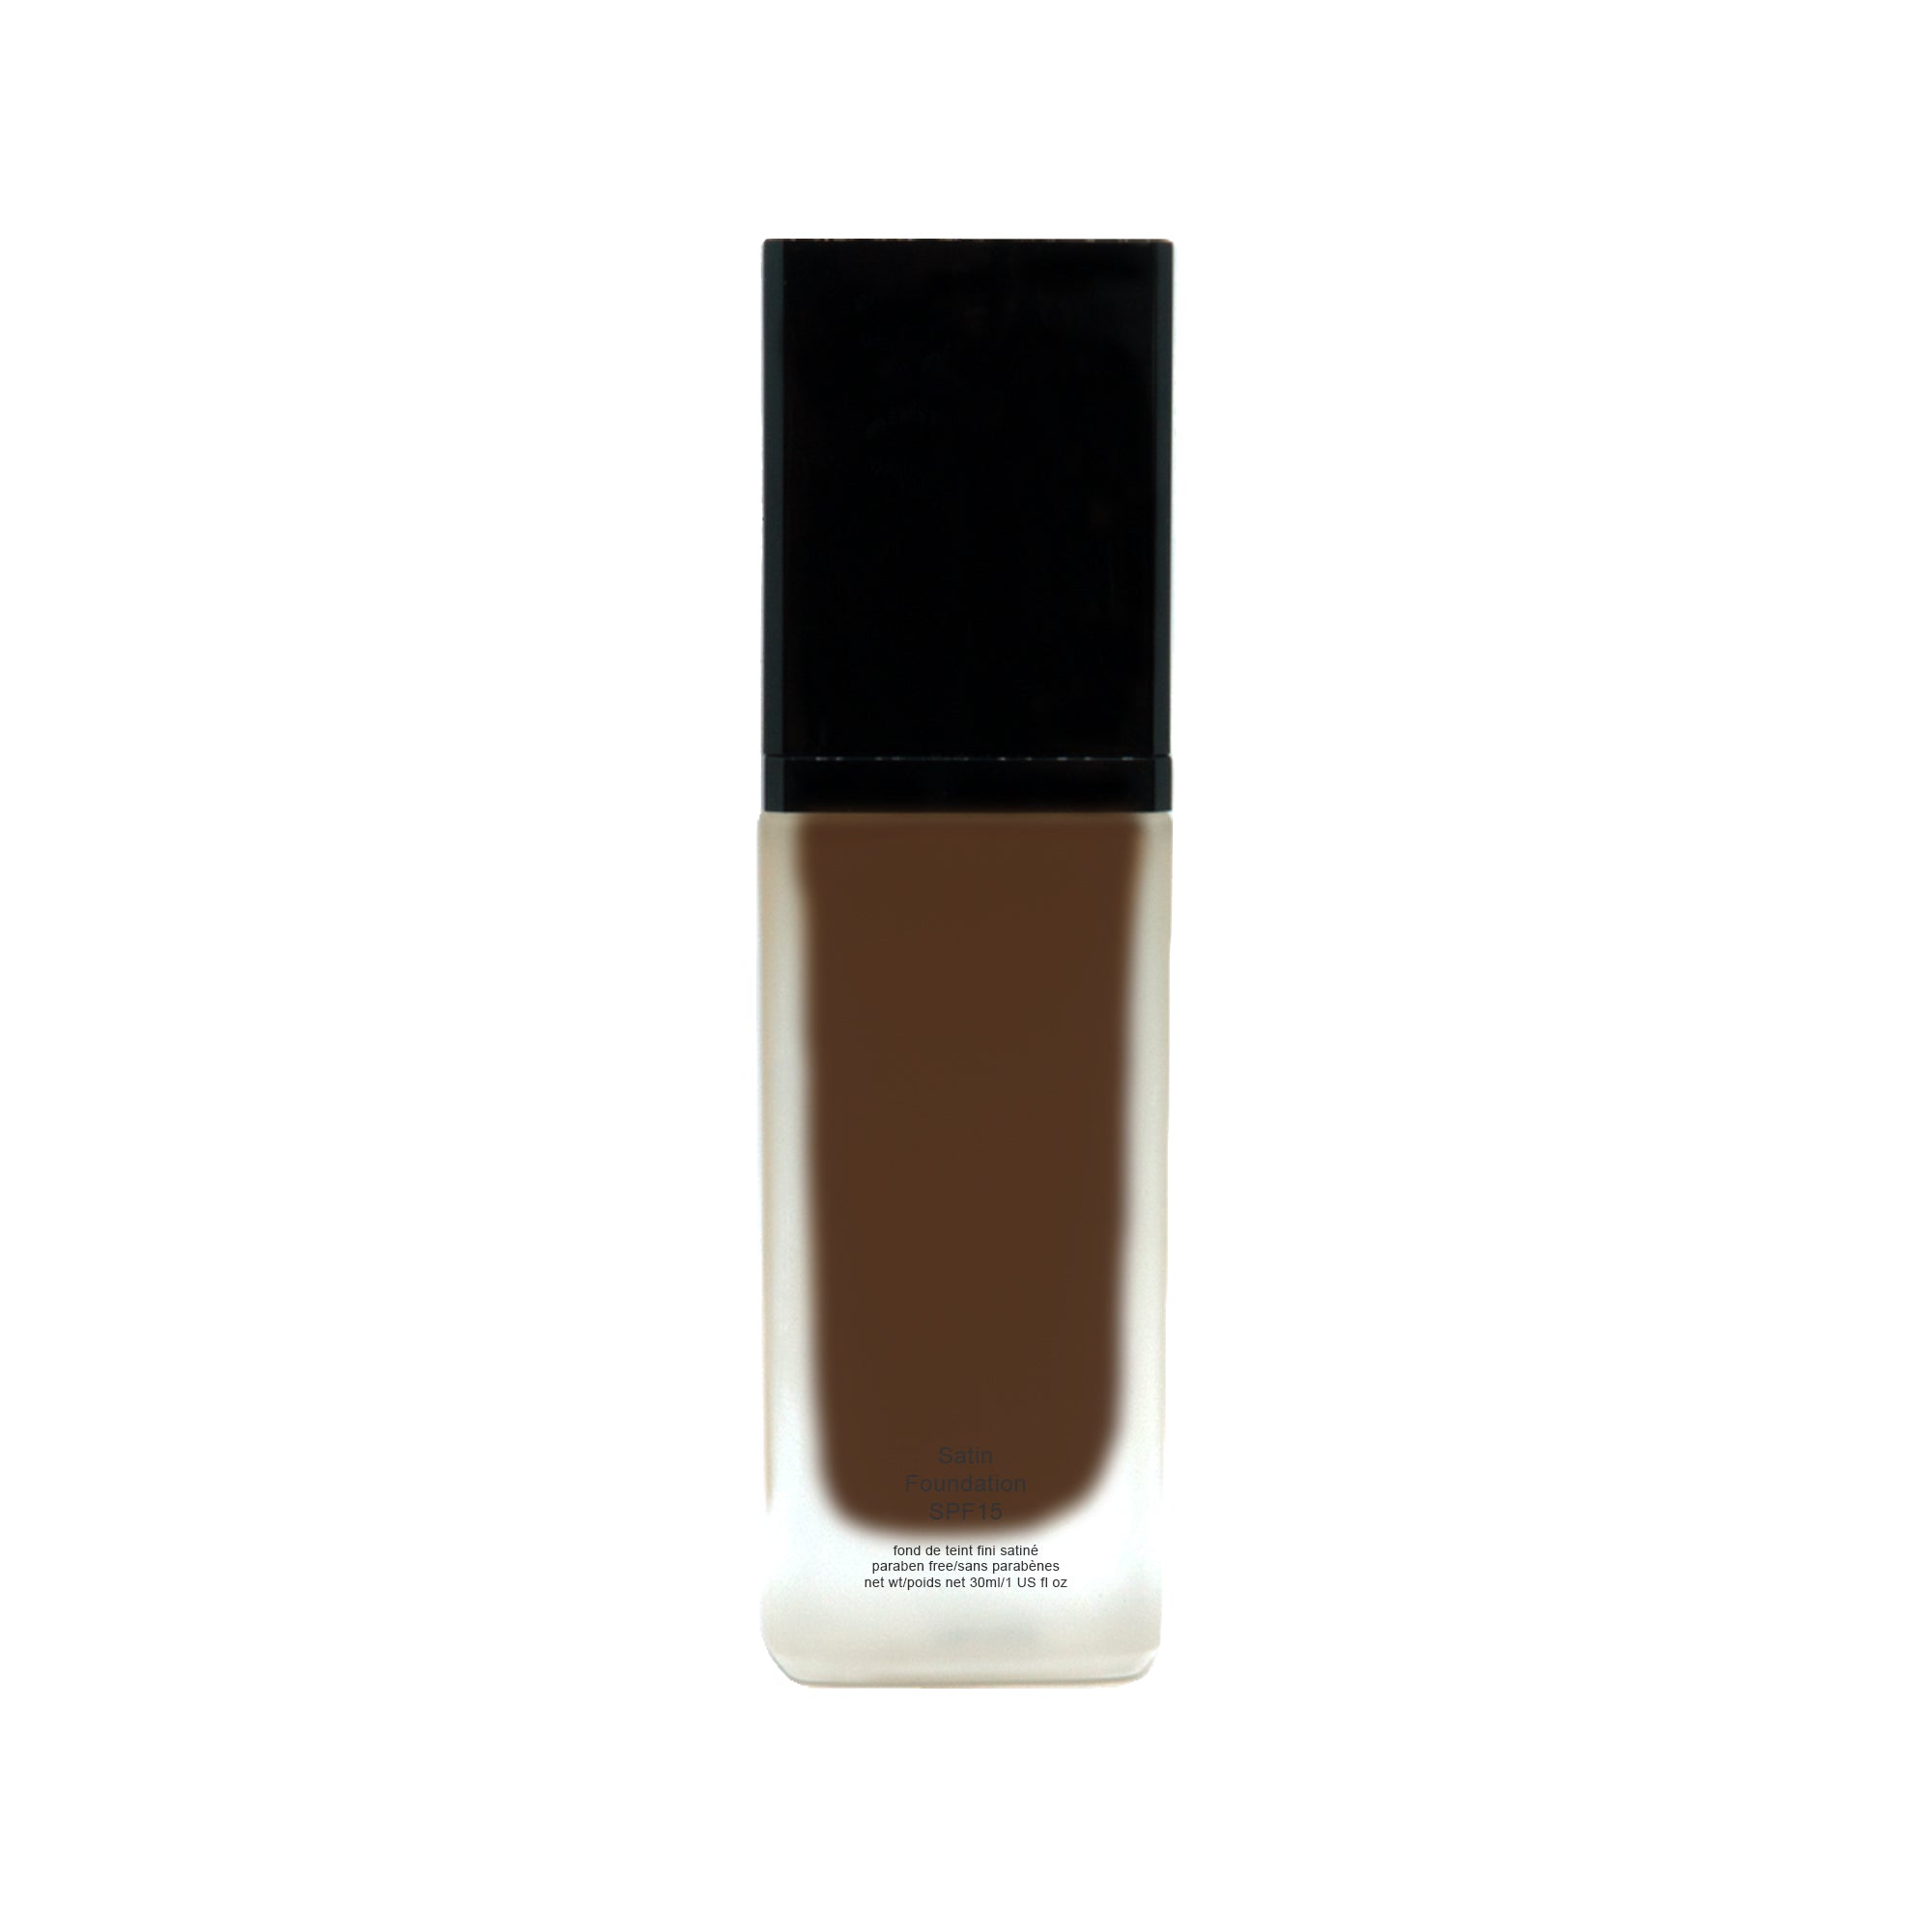 Build That Glow Foundation - Deep Umber